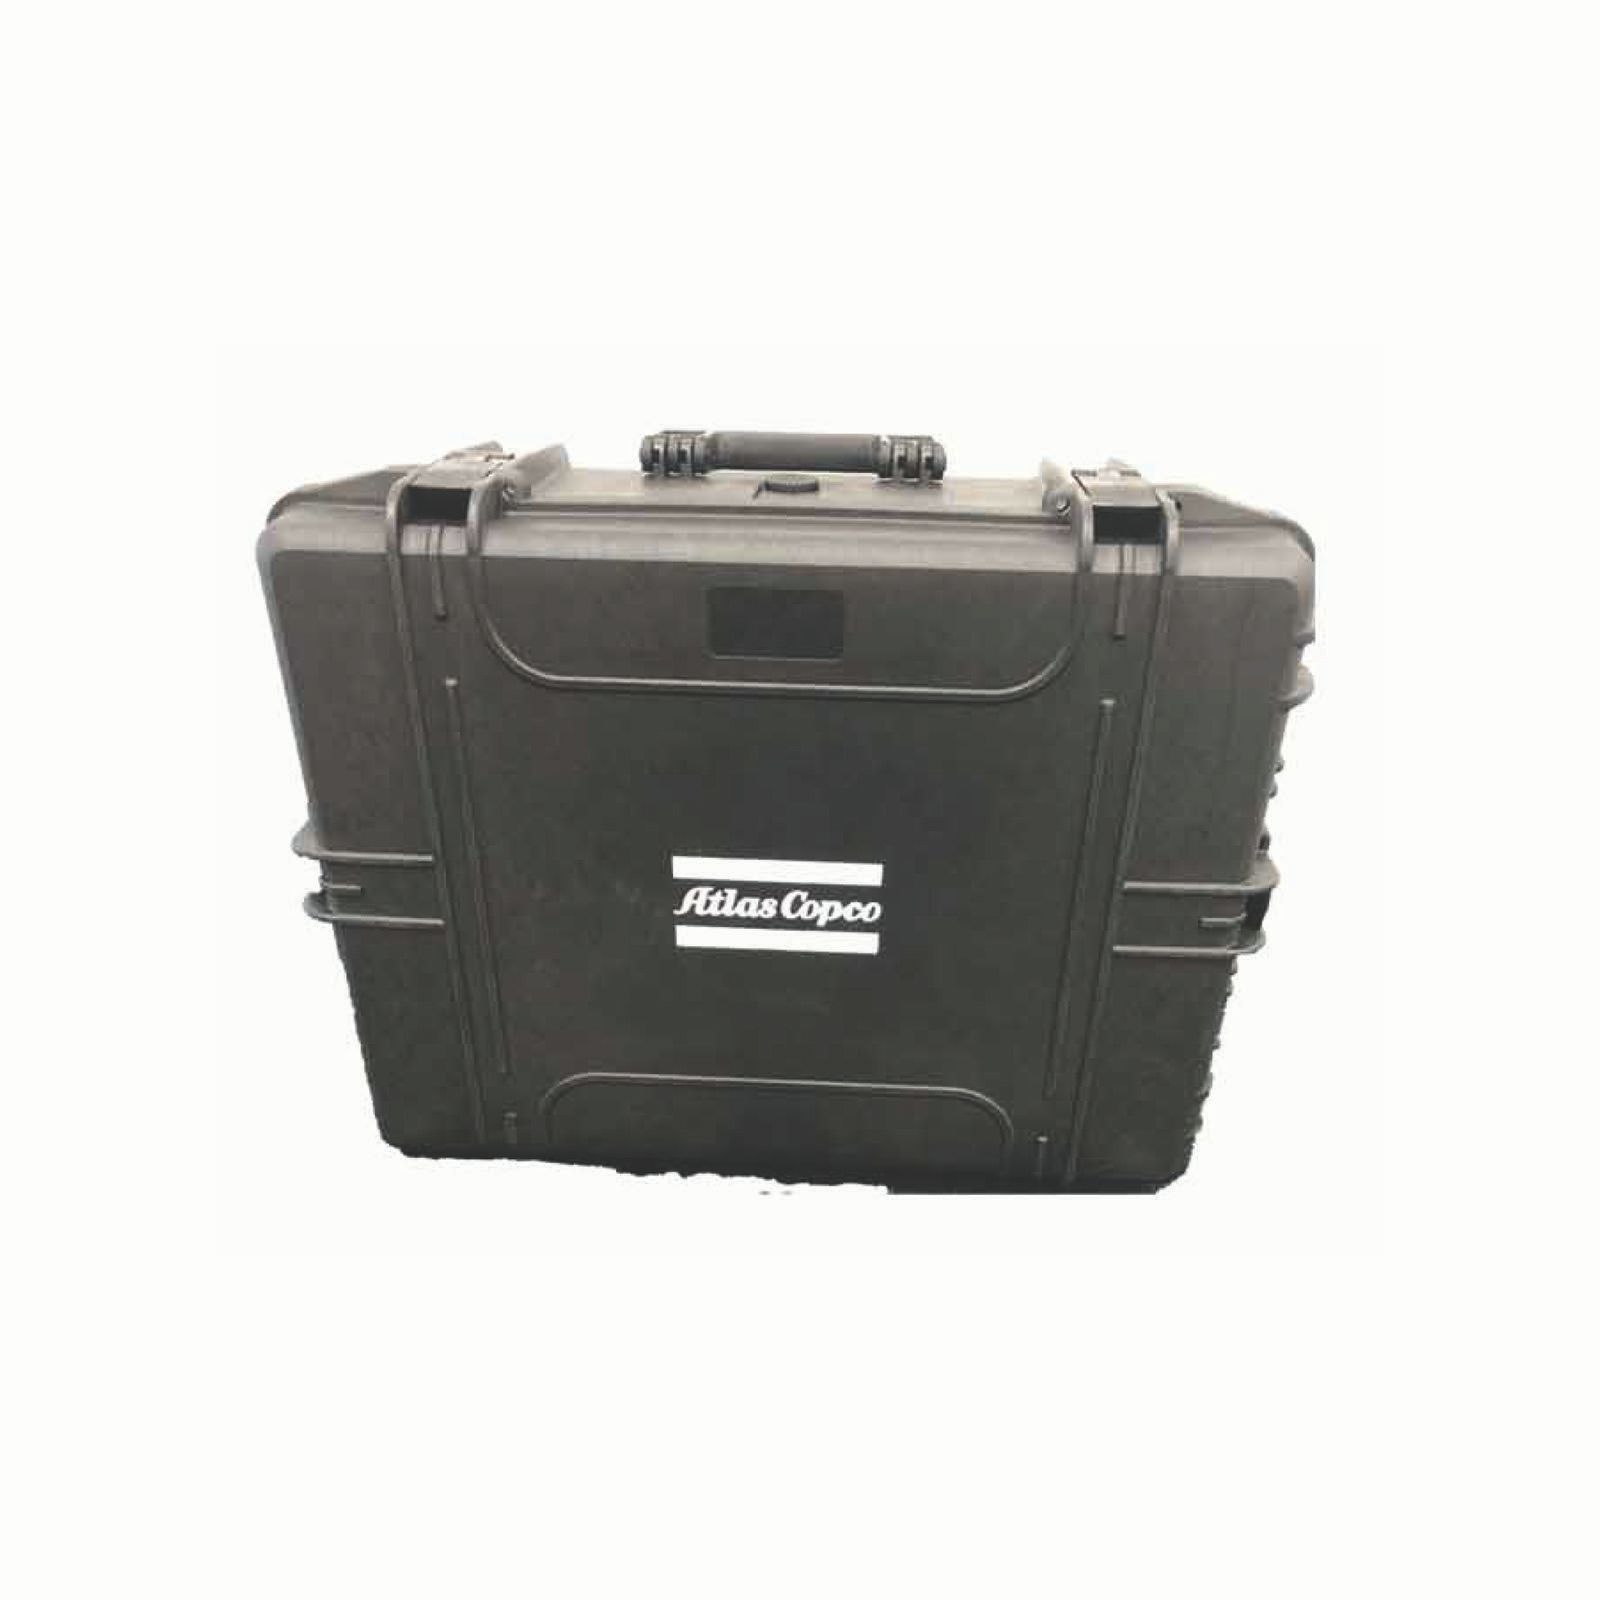 TOOL CASE product photo